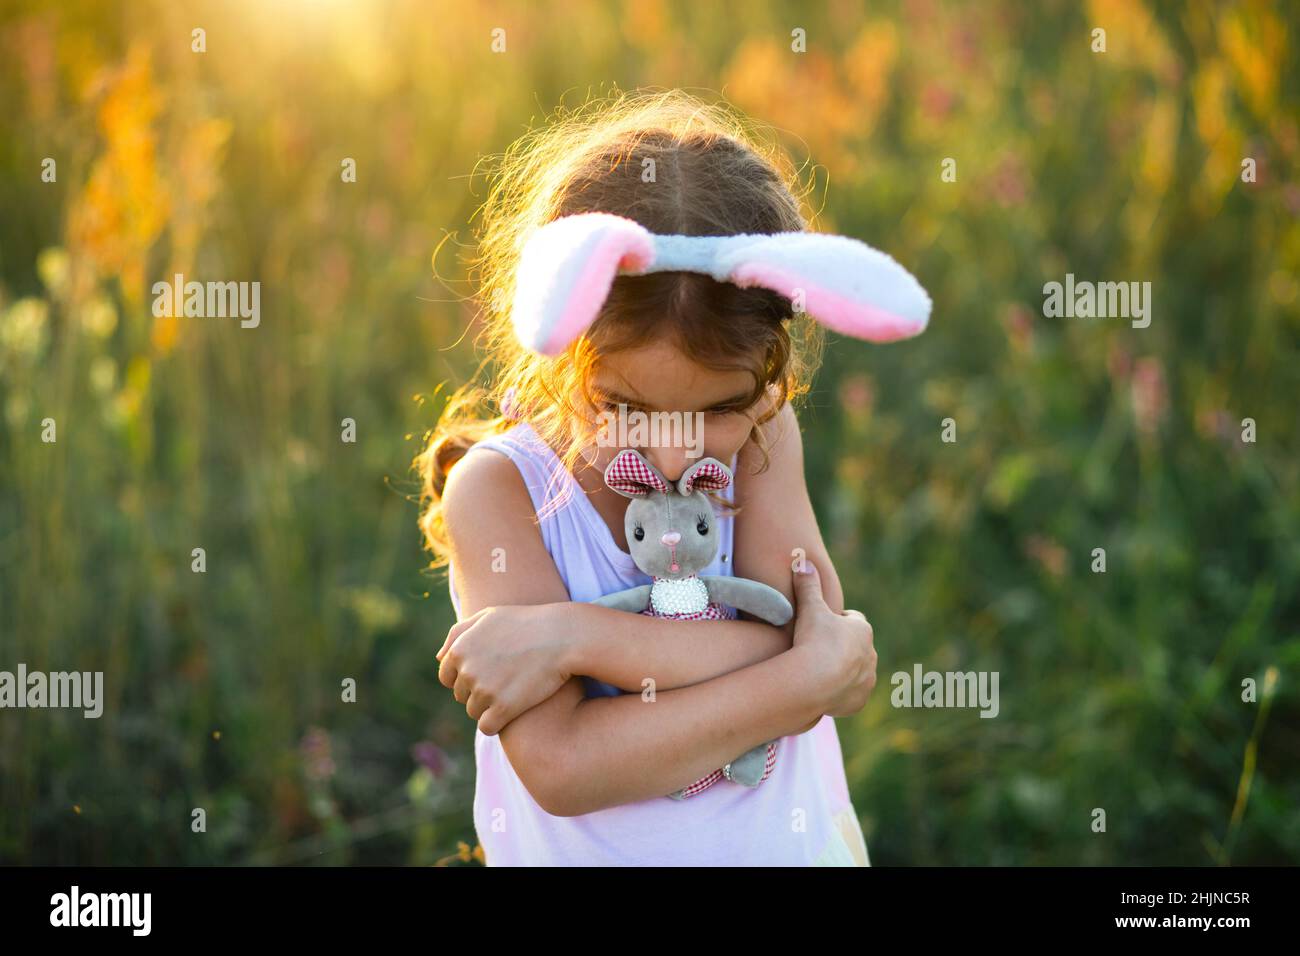 Cute 5-year-old girl with rabbit ears gently hugs a toy rabbit in nature in a blooming field in summer with golden sunlight. Easter, Easter bunny, chi Stock Photo